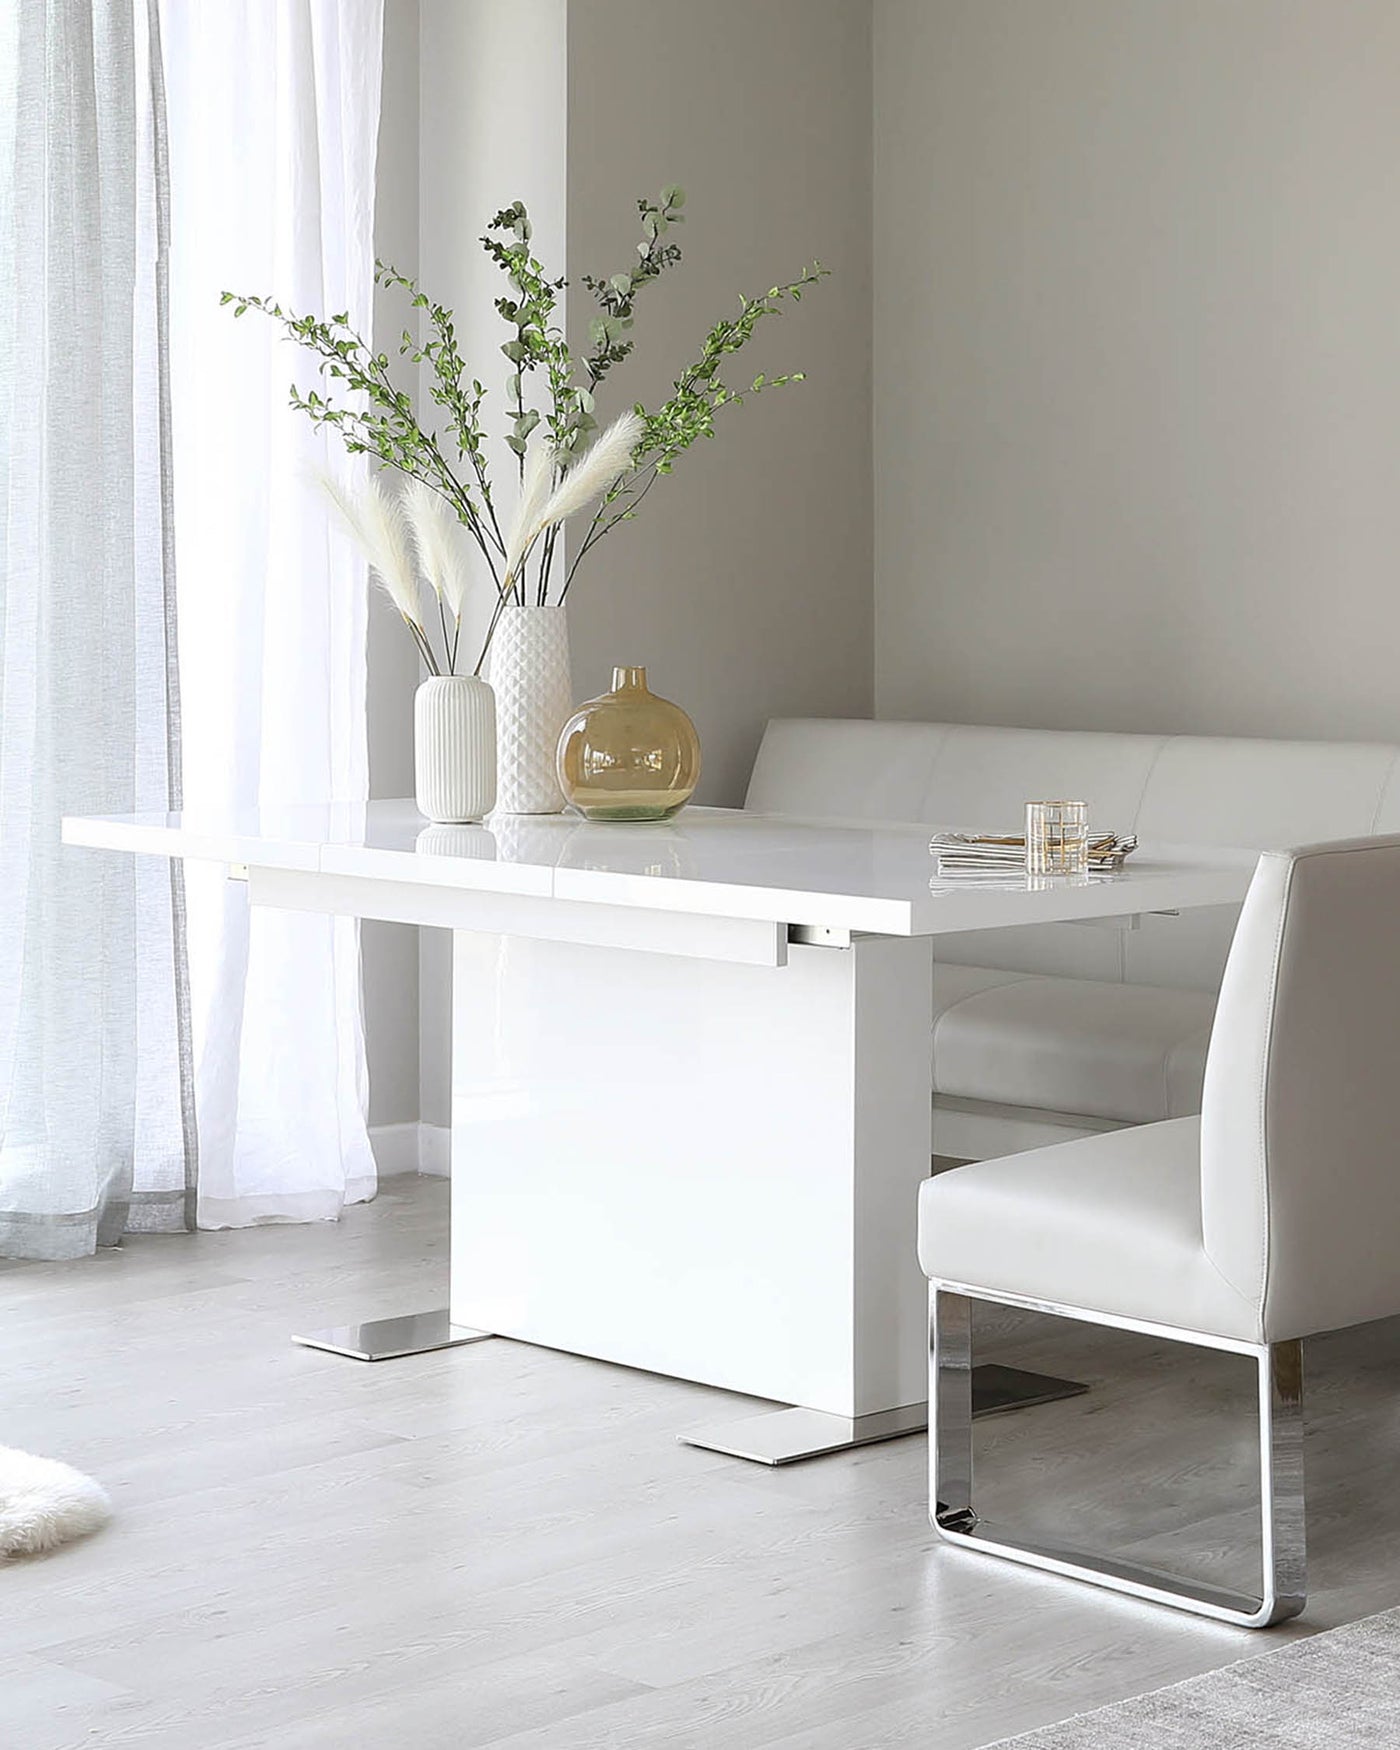 Modern minimalist dining set featuring a sleek white rectangular table with a pedestal base, paired with a matching white corner bench and a single white dining chair with chrome base. The set is complemented by elegant home decor including a vase with greenery, a decorative bottle, and a simple glass coaster set.